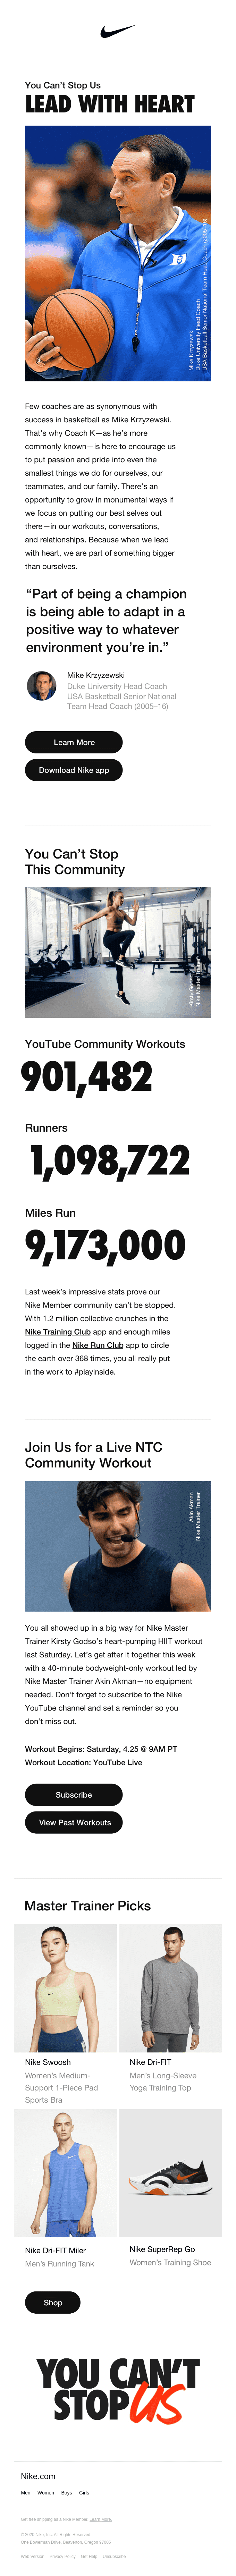 Example of a marketing email from Nike